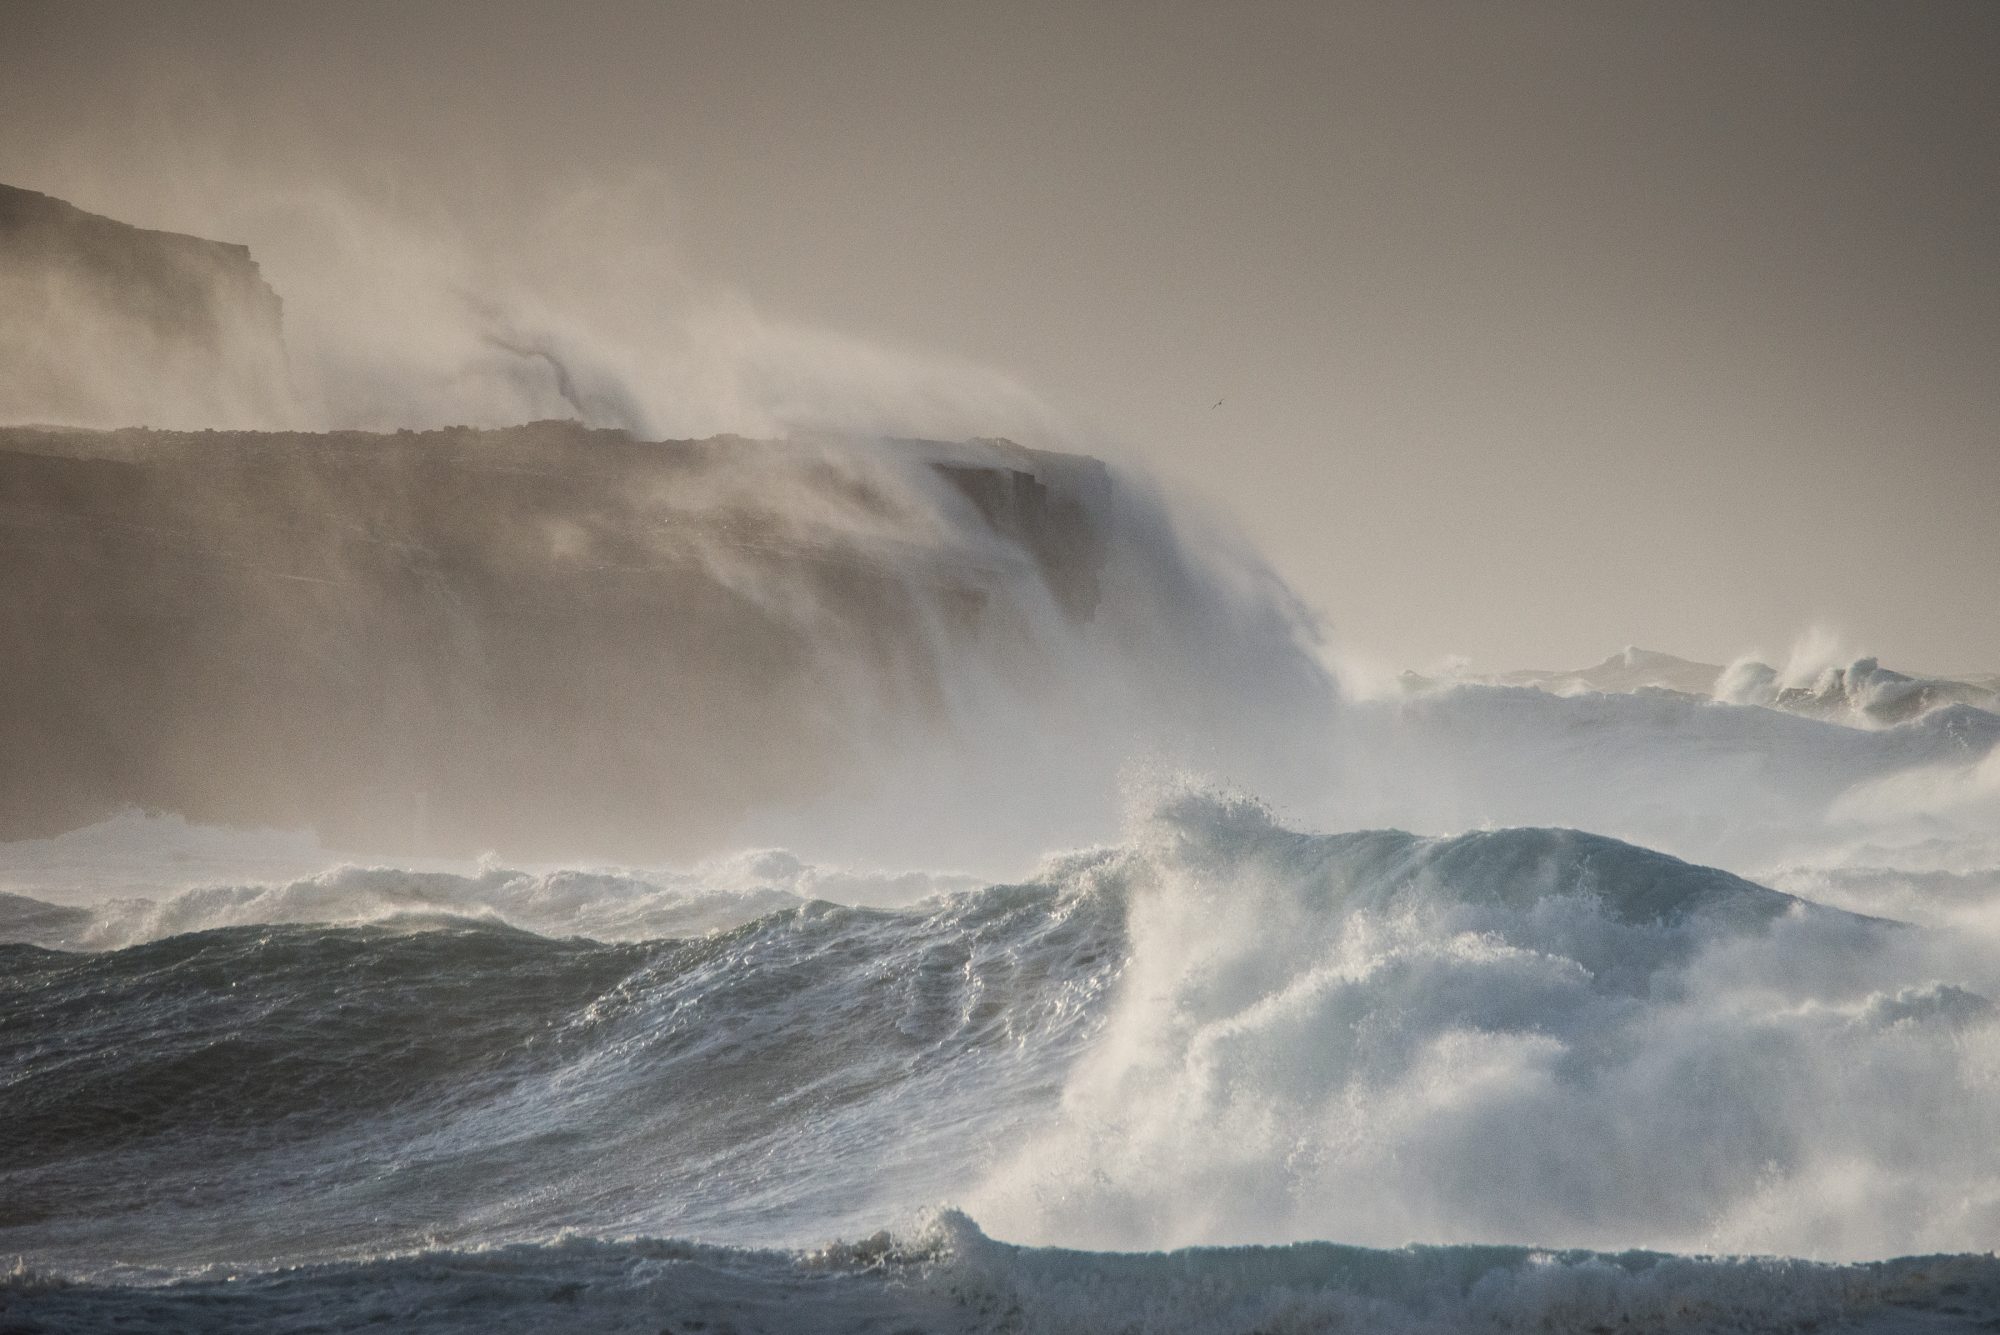 stormy seas hitting cliffs on orkney at skaill bay